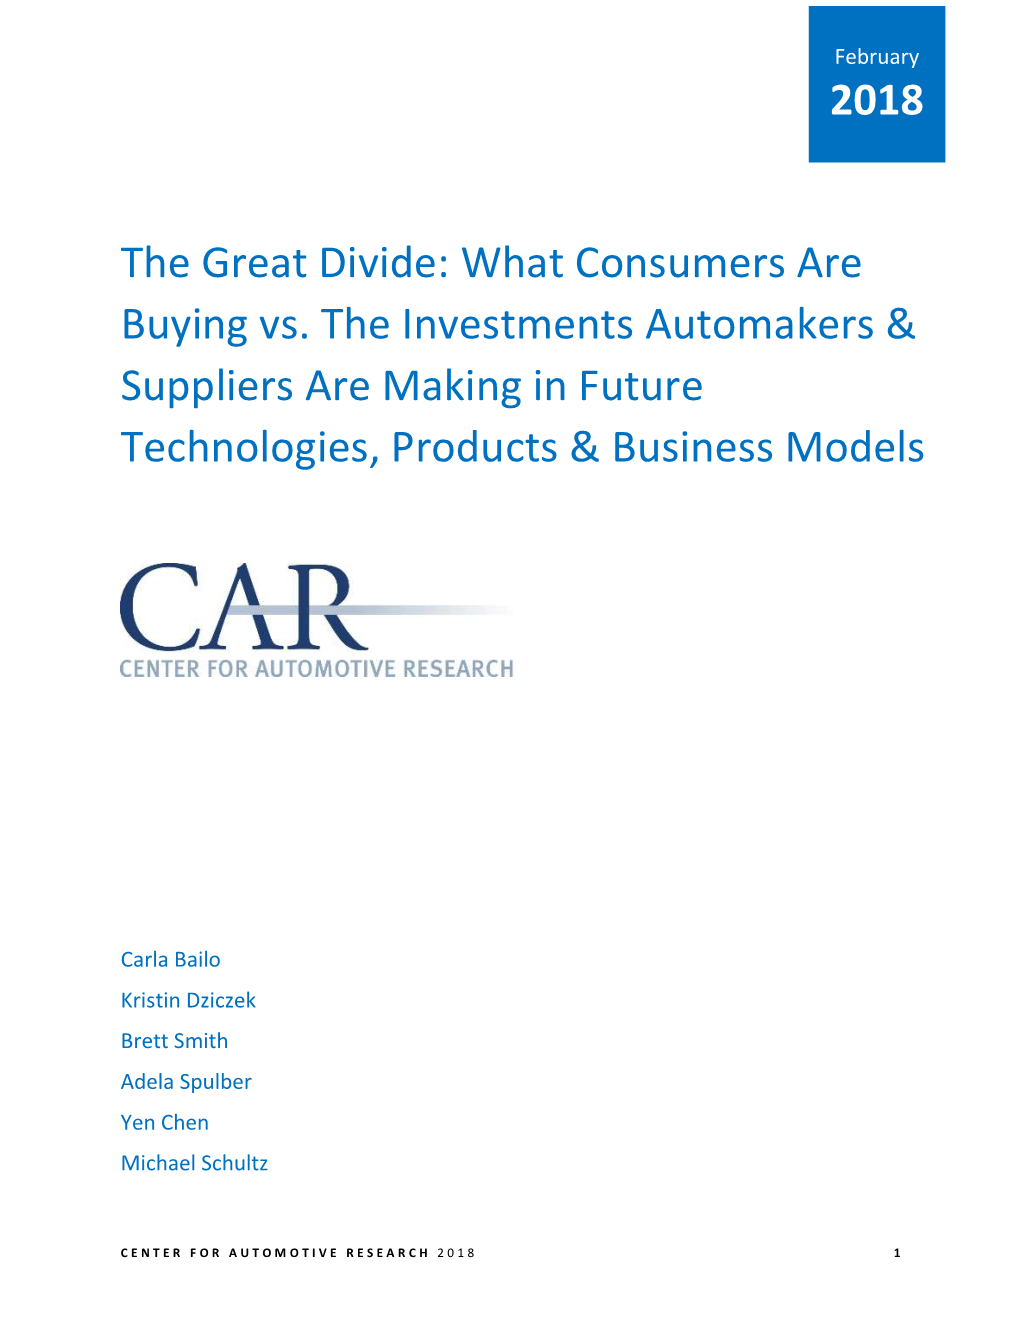 What Consumers Are Buying Vs. the Investments Automakers & Suppliers Are Making in Future Technologies, Products & Business Models